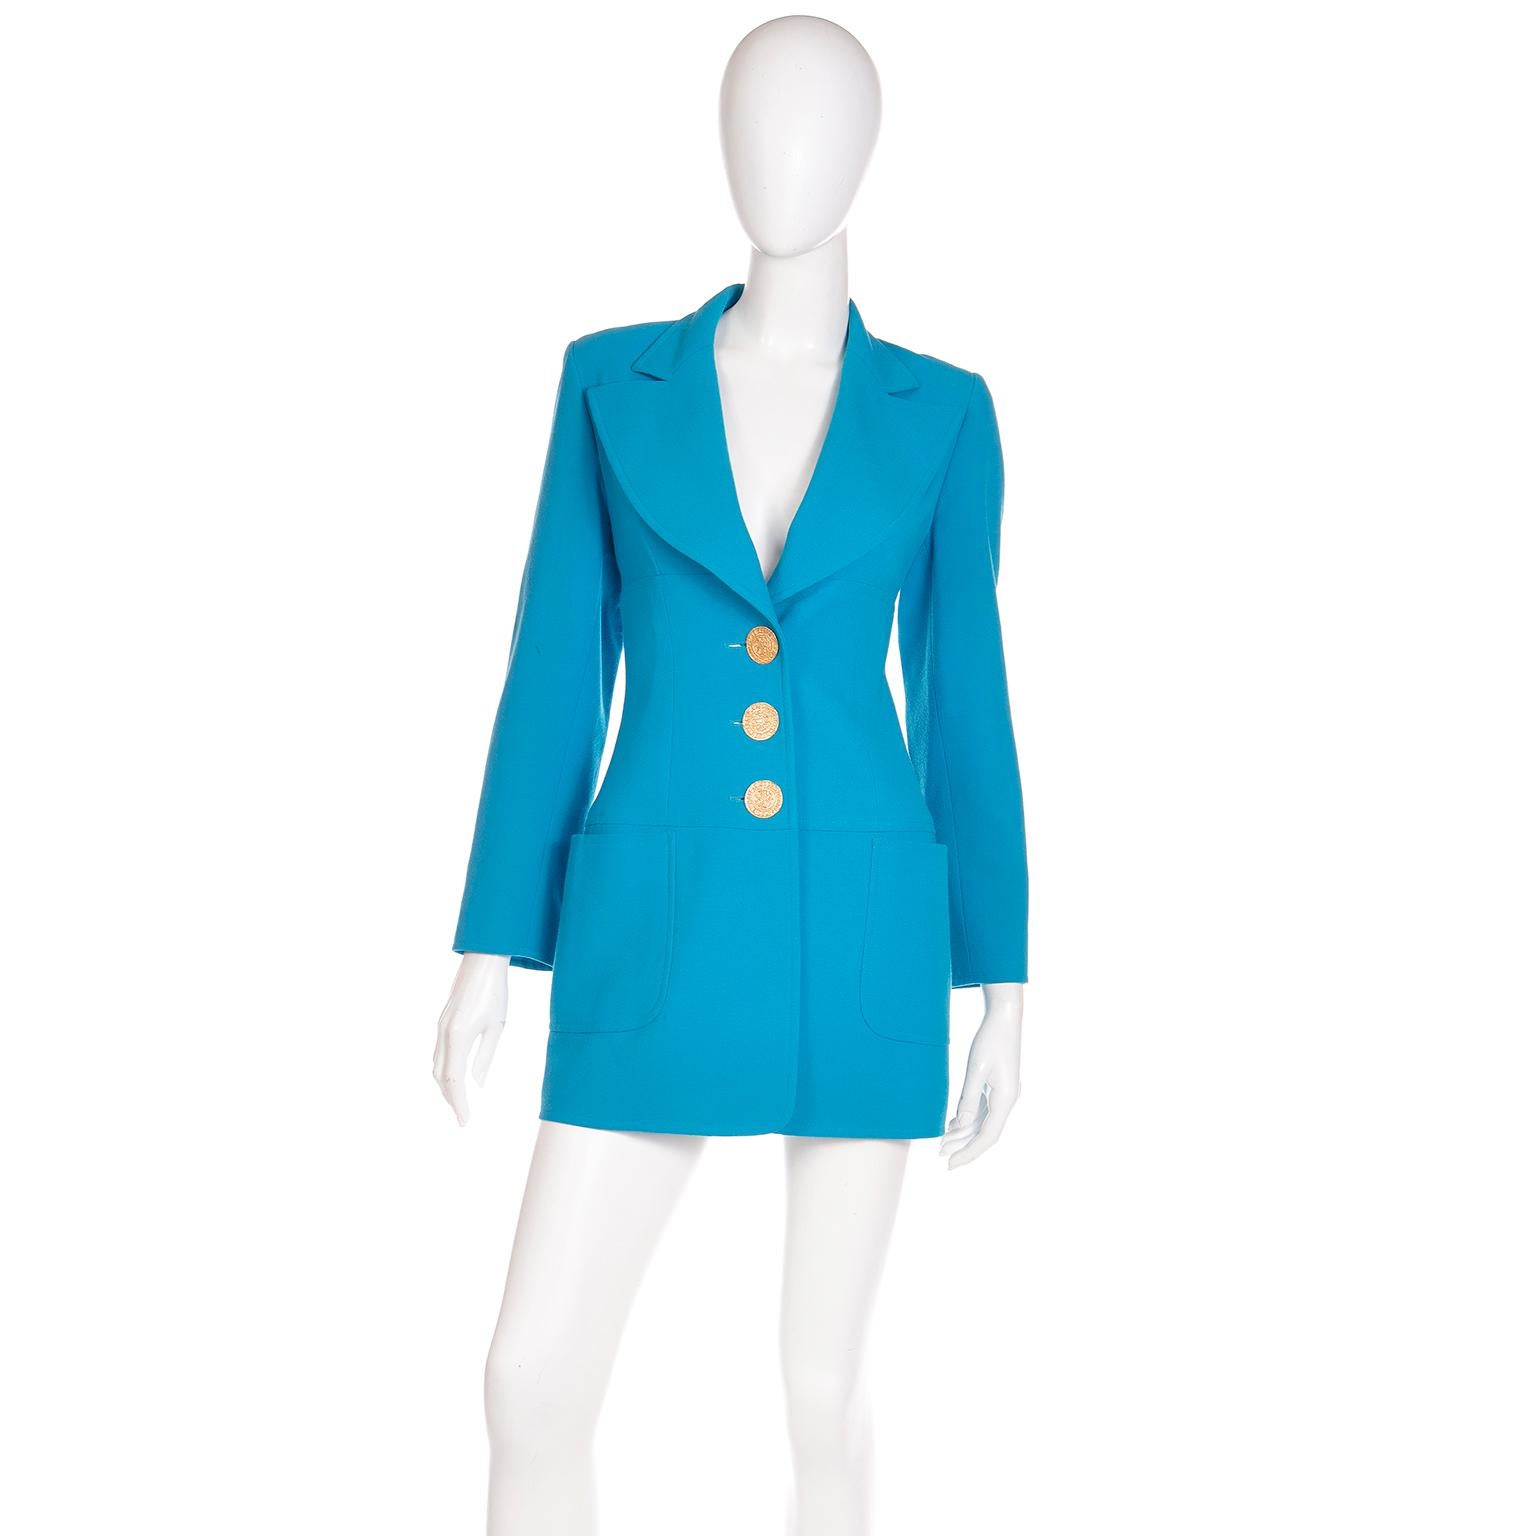 This is a Christian LaCroix vintage Spring Summer 1995 peacock blue long line blazer with embossed gold buttons This fine wool jacket has a flattering, fitted silhouette in a longline style. The gorgeous large 1 and 3/8